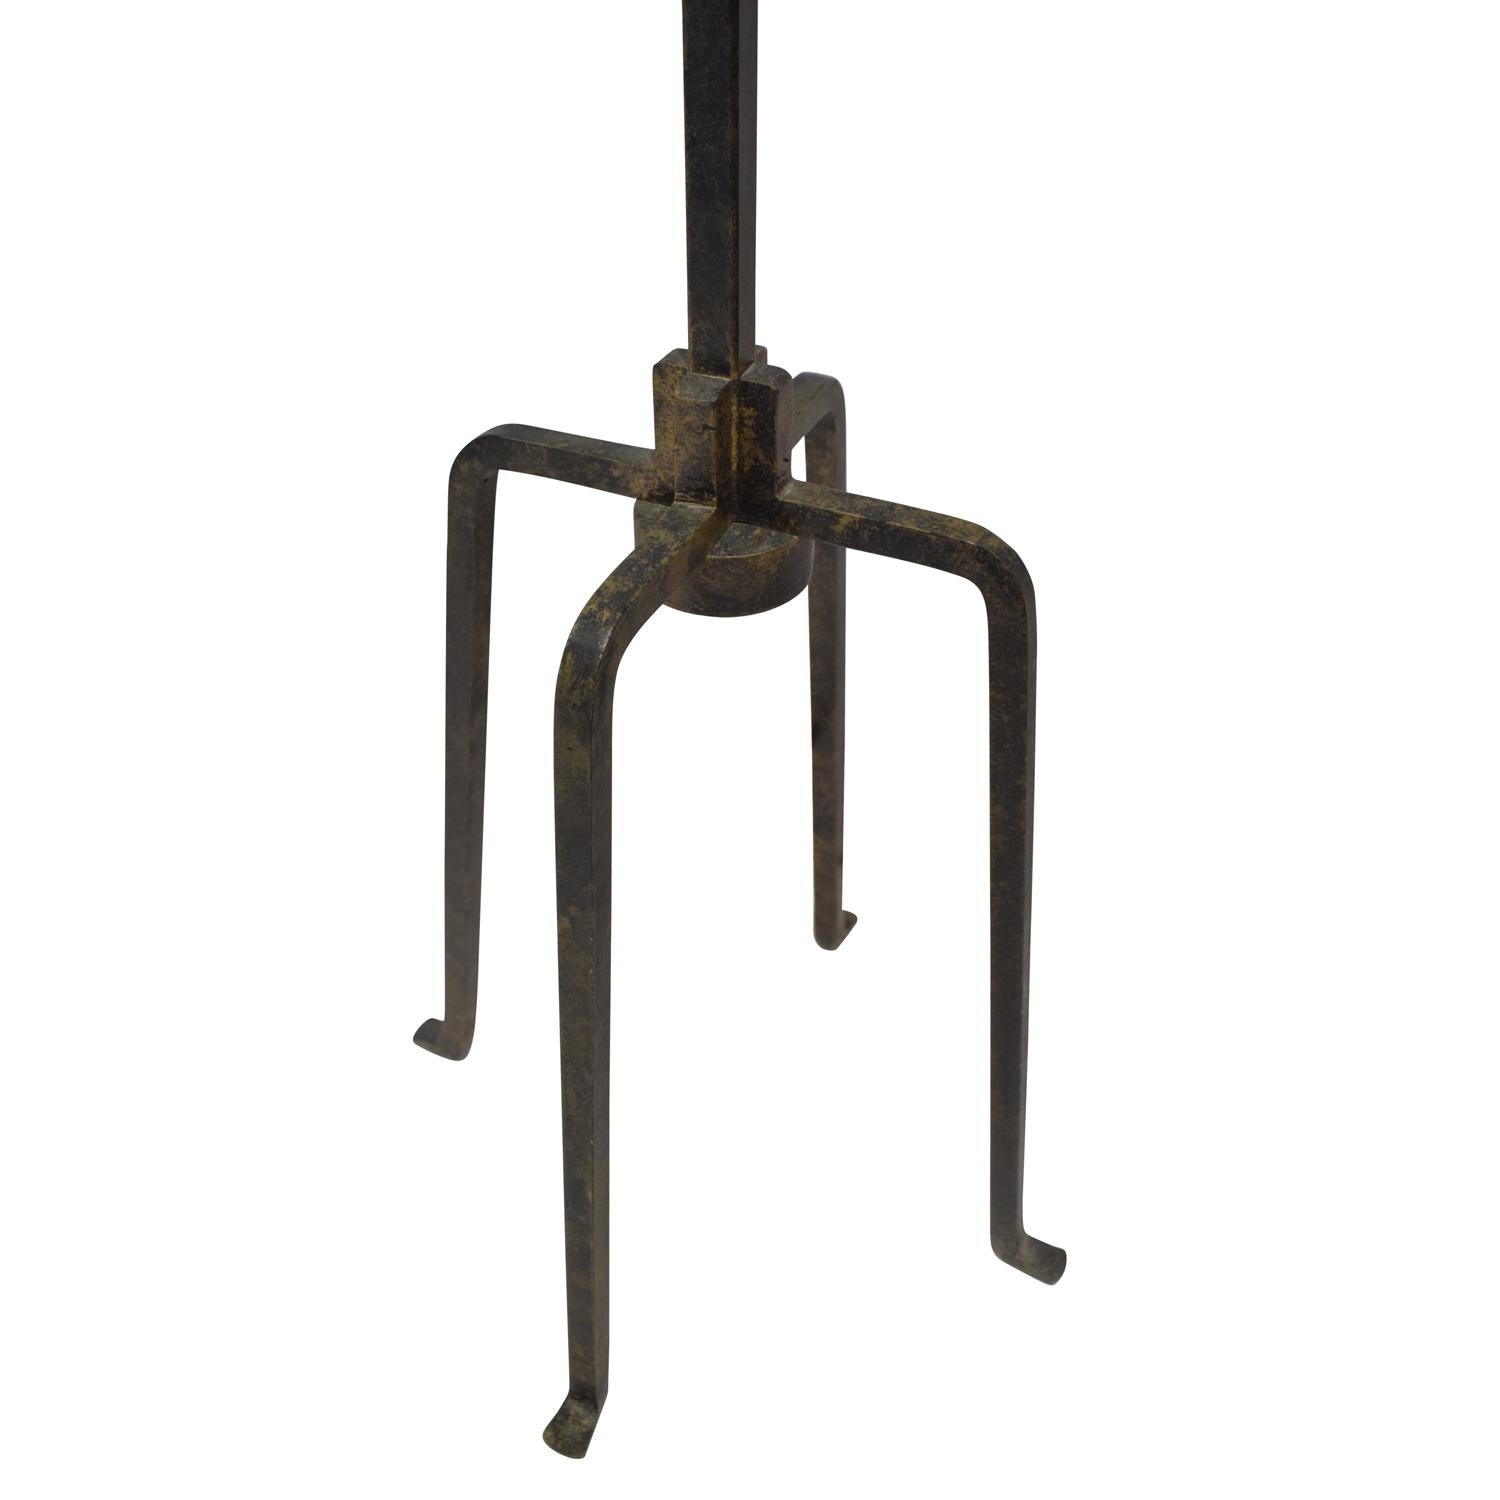 Hand-Crafted Tommi Parzinger Elegant Floor Lamp in Wrought Iron, 1950s